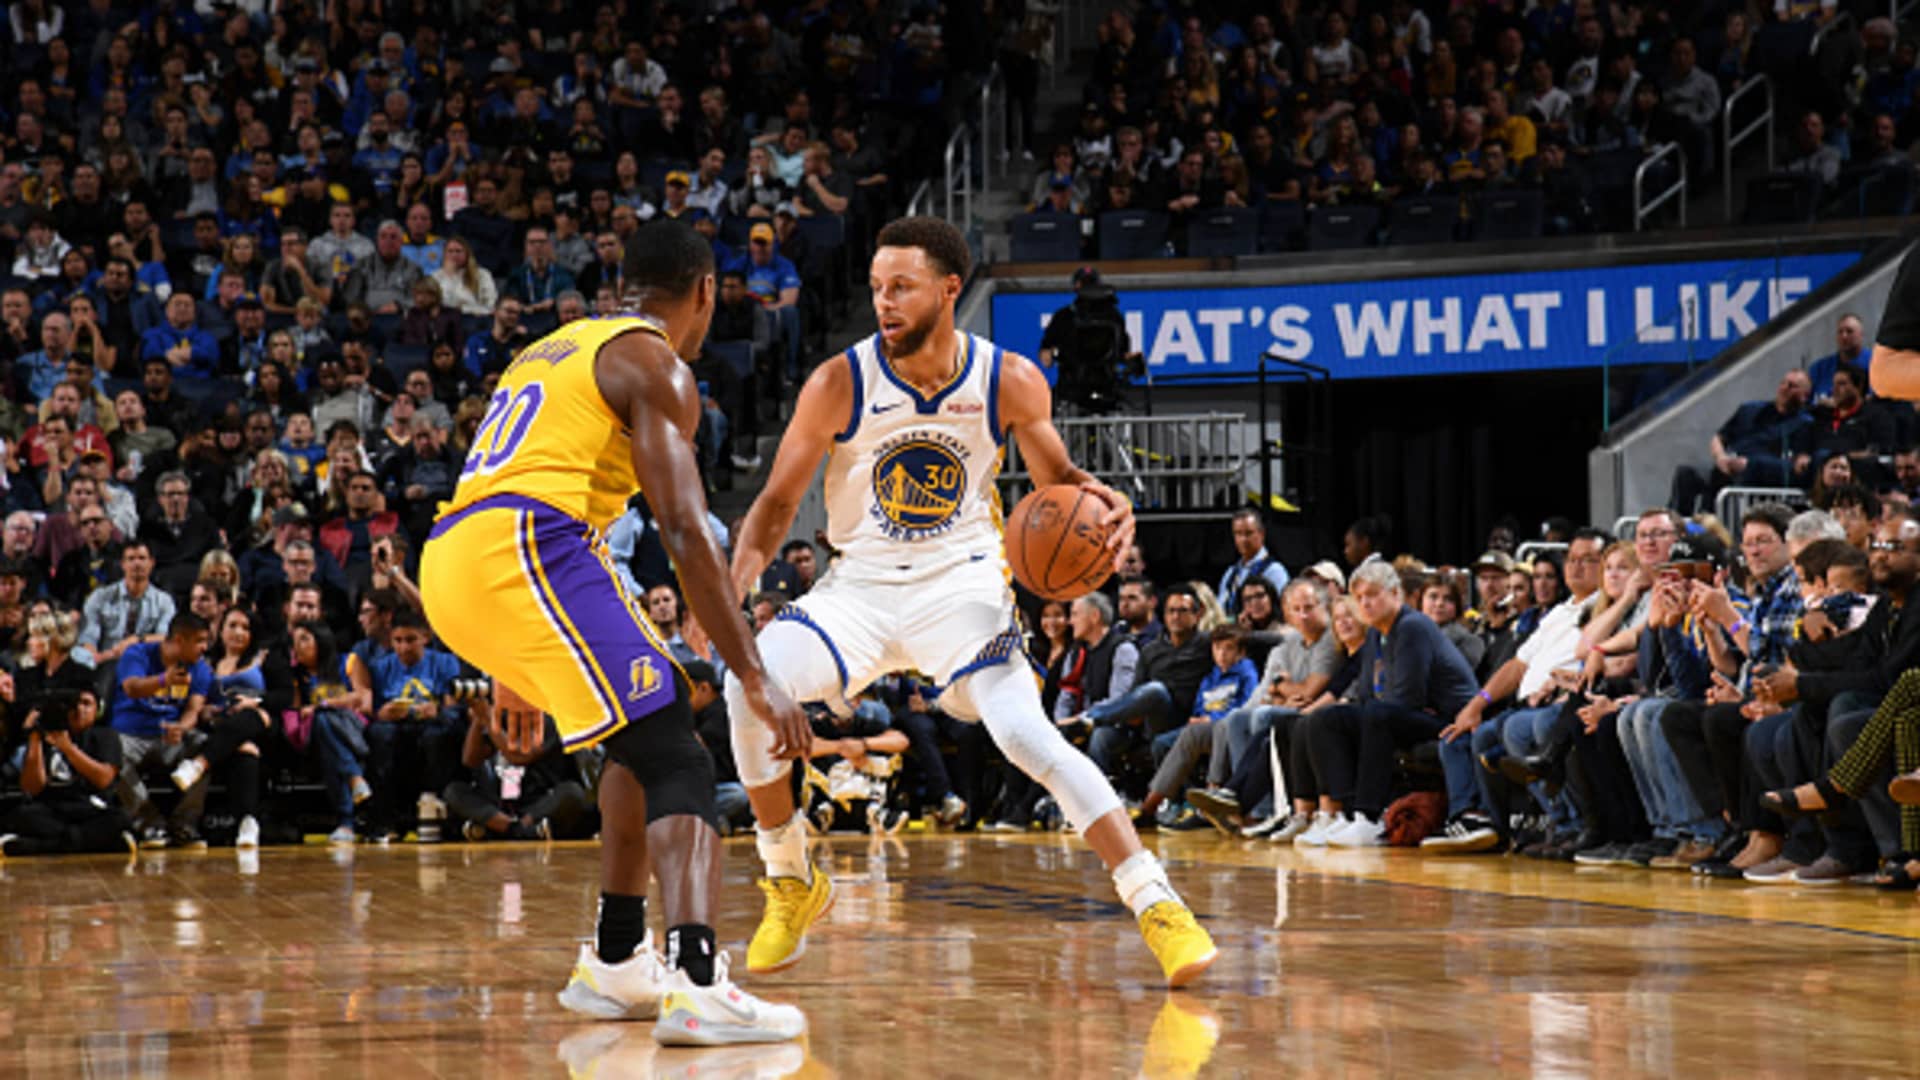 Stephen Curry #30 of the Golden State Warriors handles the ball against the Los Angeles Lakers during a pre-season game on October 18, 2019 at Chase Center in San Francisco, California.